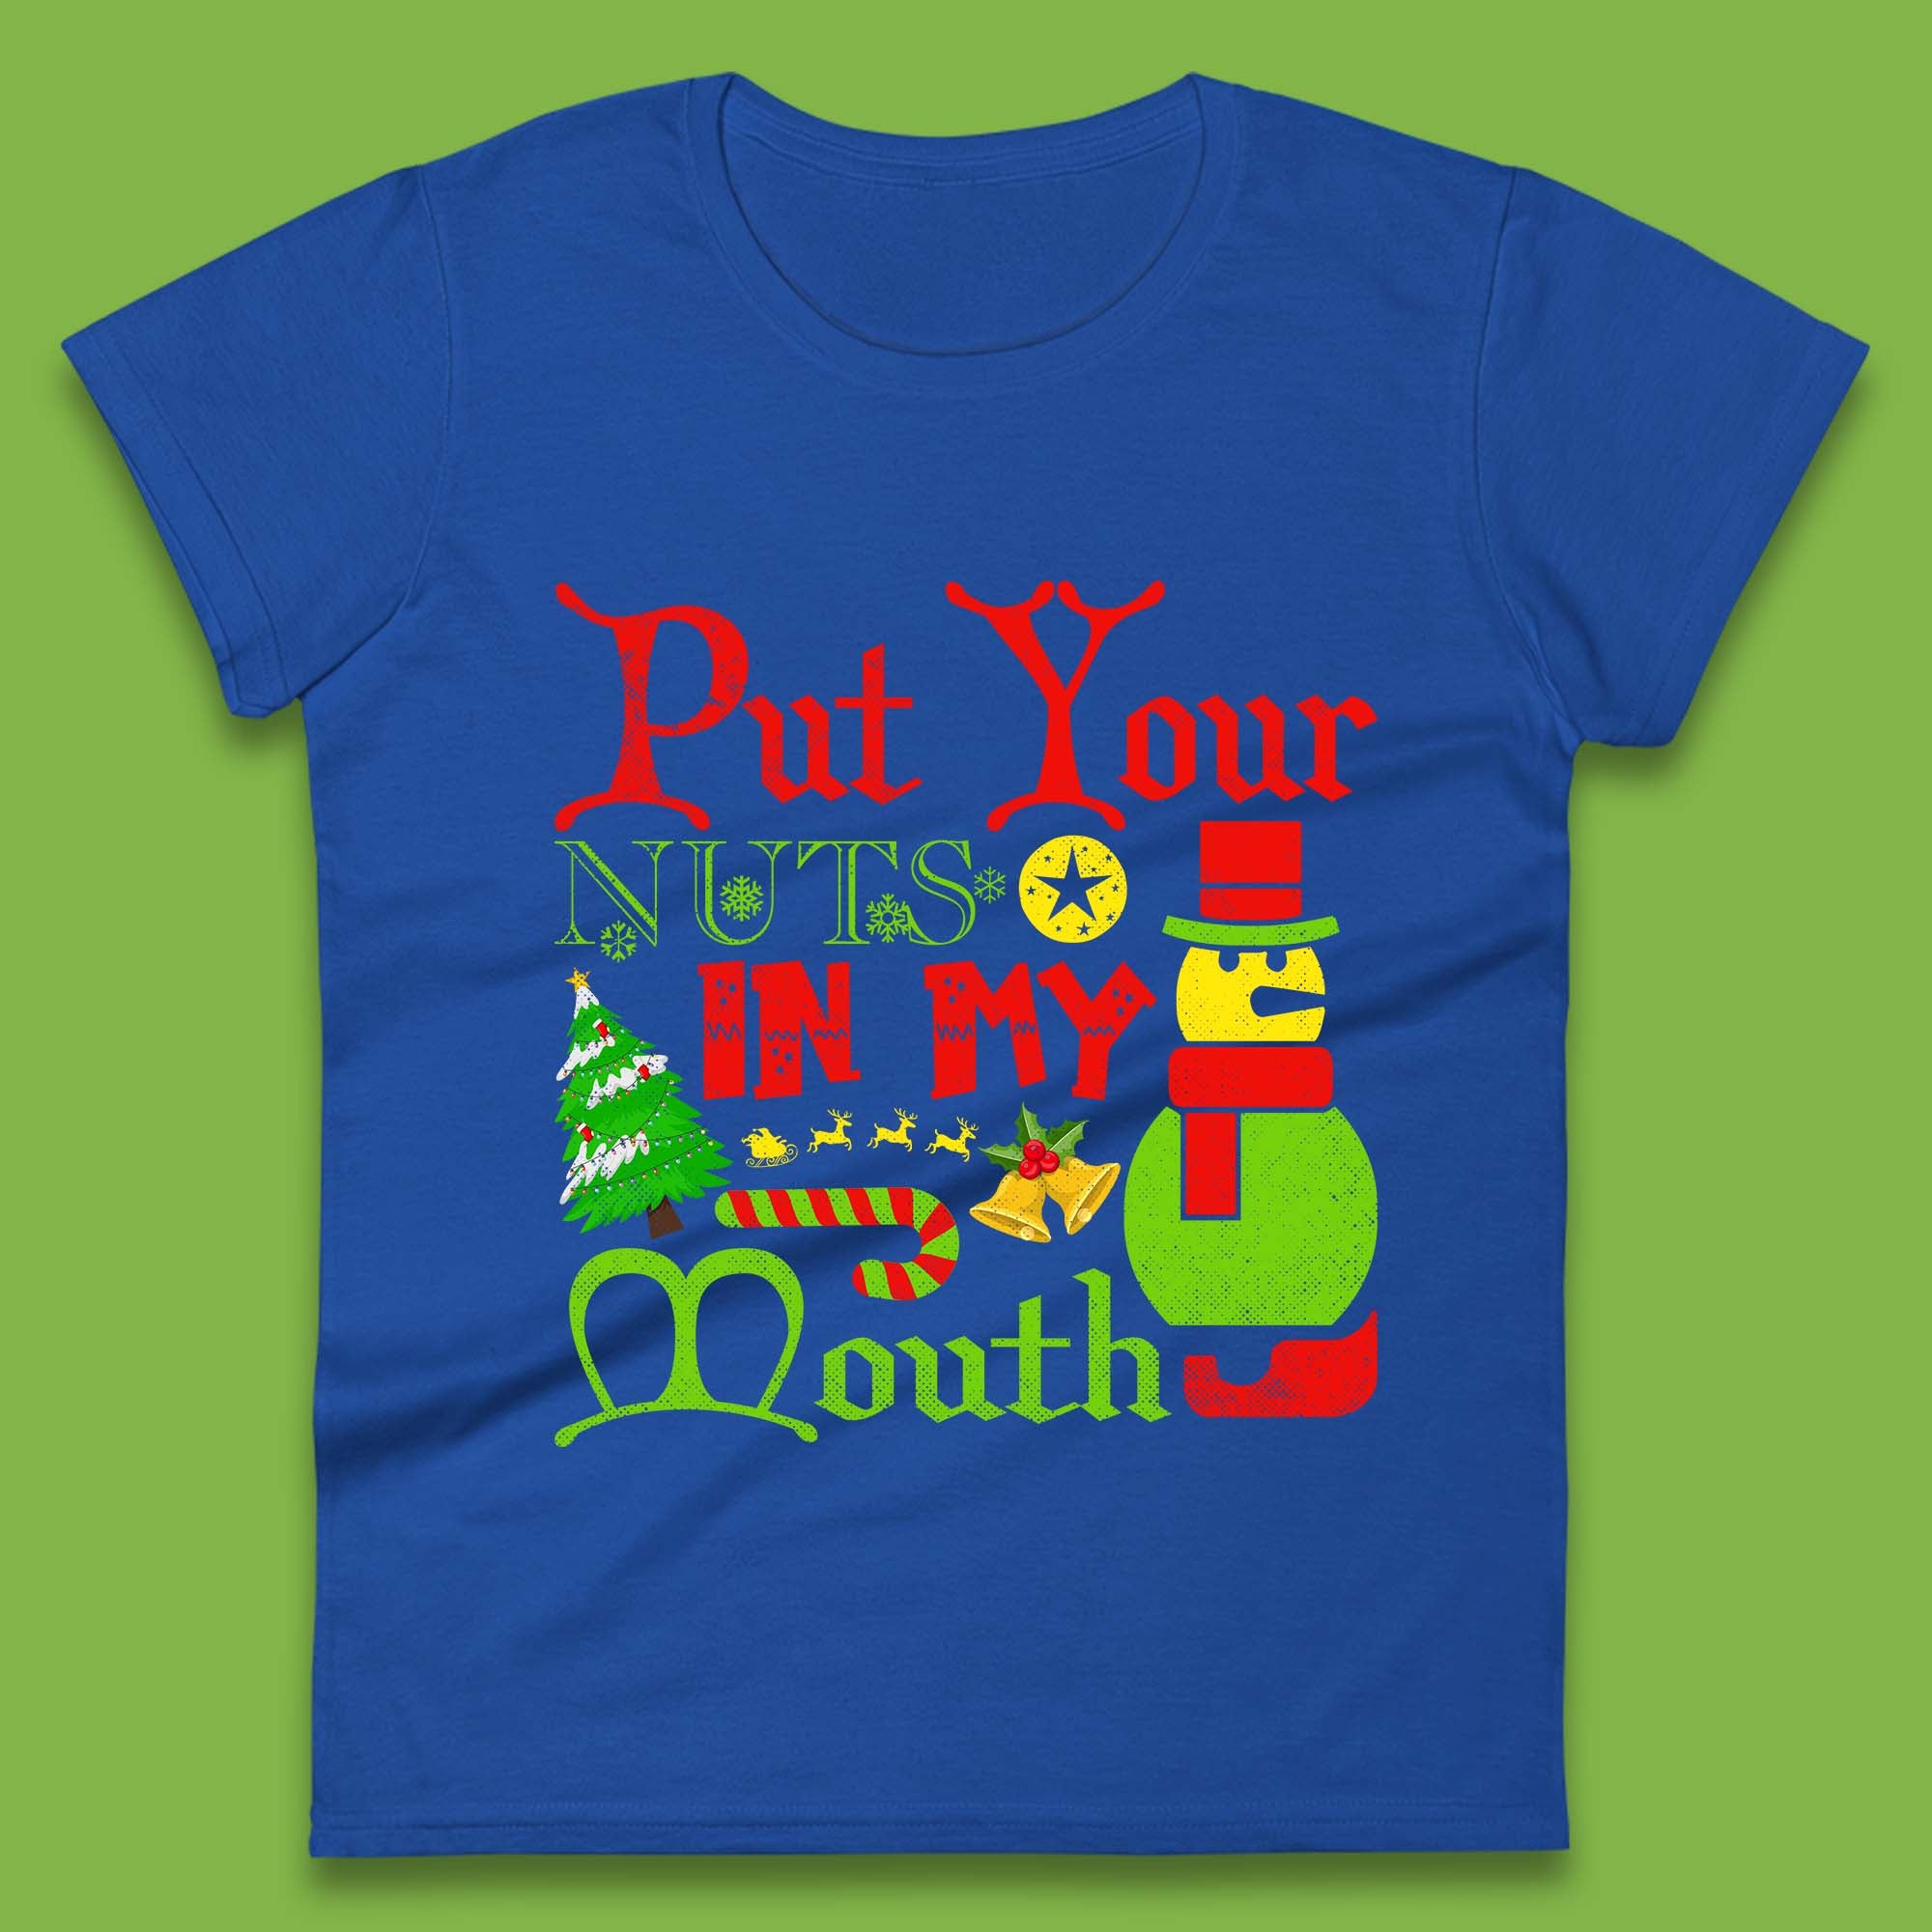 Put Your Nuts In My Mouth Funny Christmas Holiday Humor Offensive Xmas Rude Joke Womens Tee Top